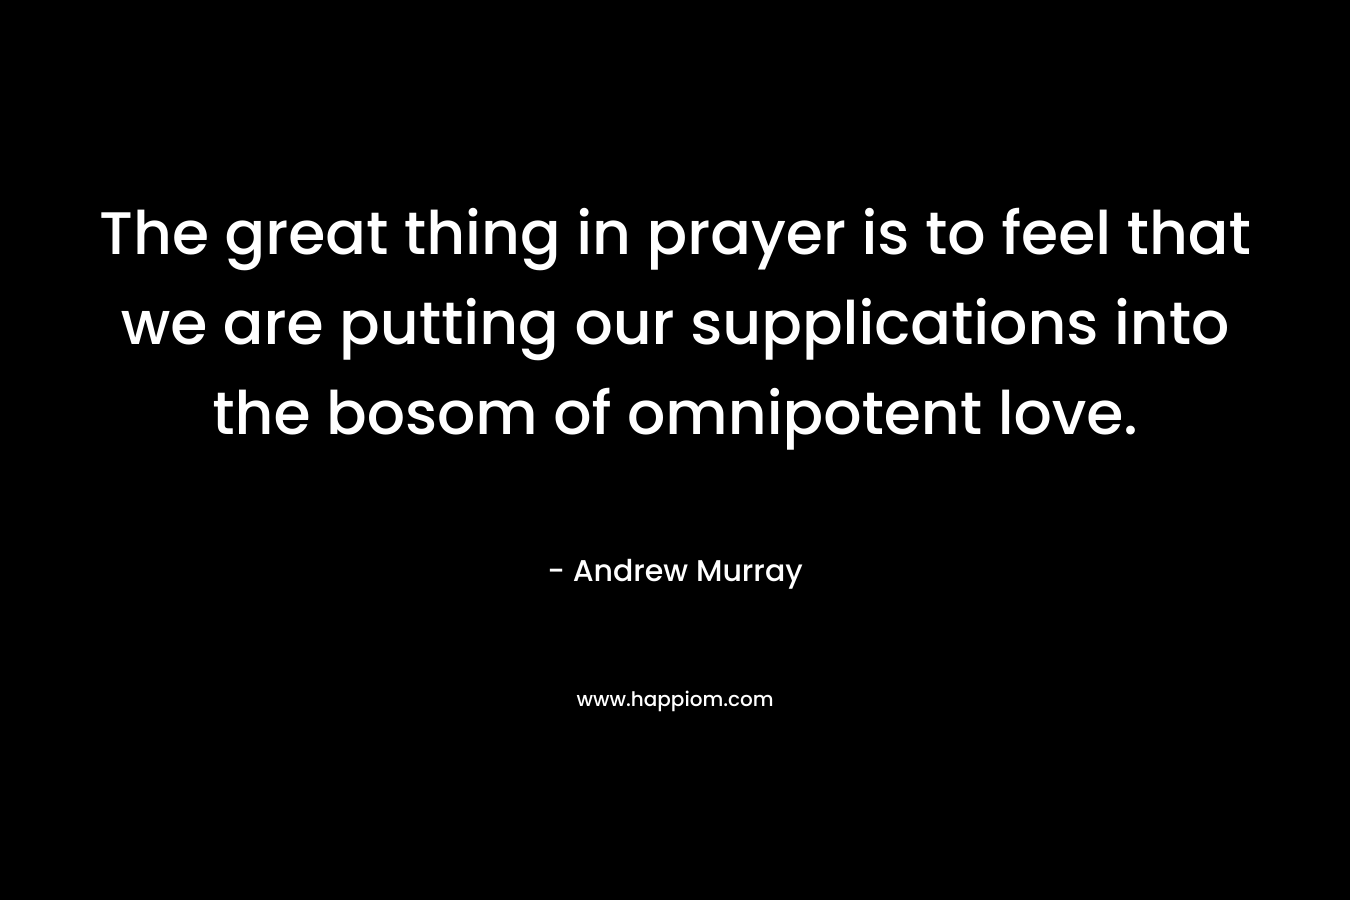 The great thing in prayer is to feel that we are putting our supplications into the bosom of omnipotent love. – Andrew Murray